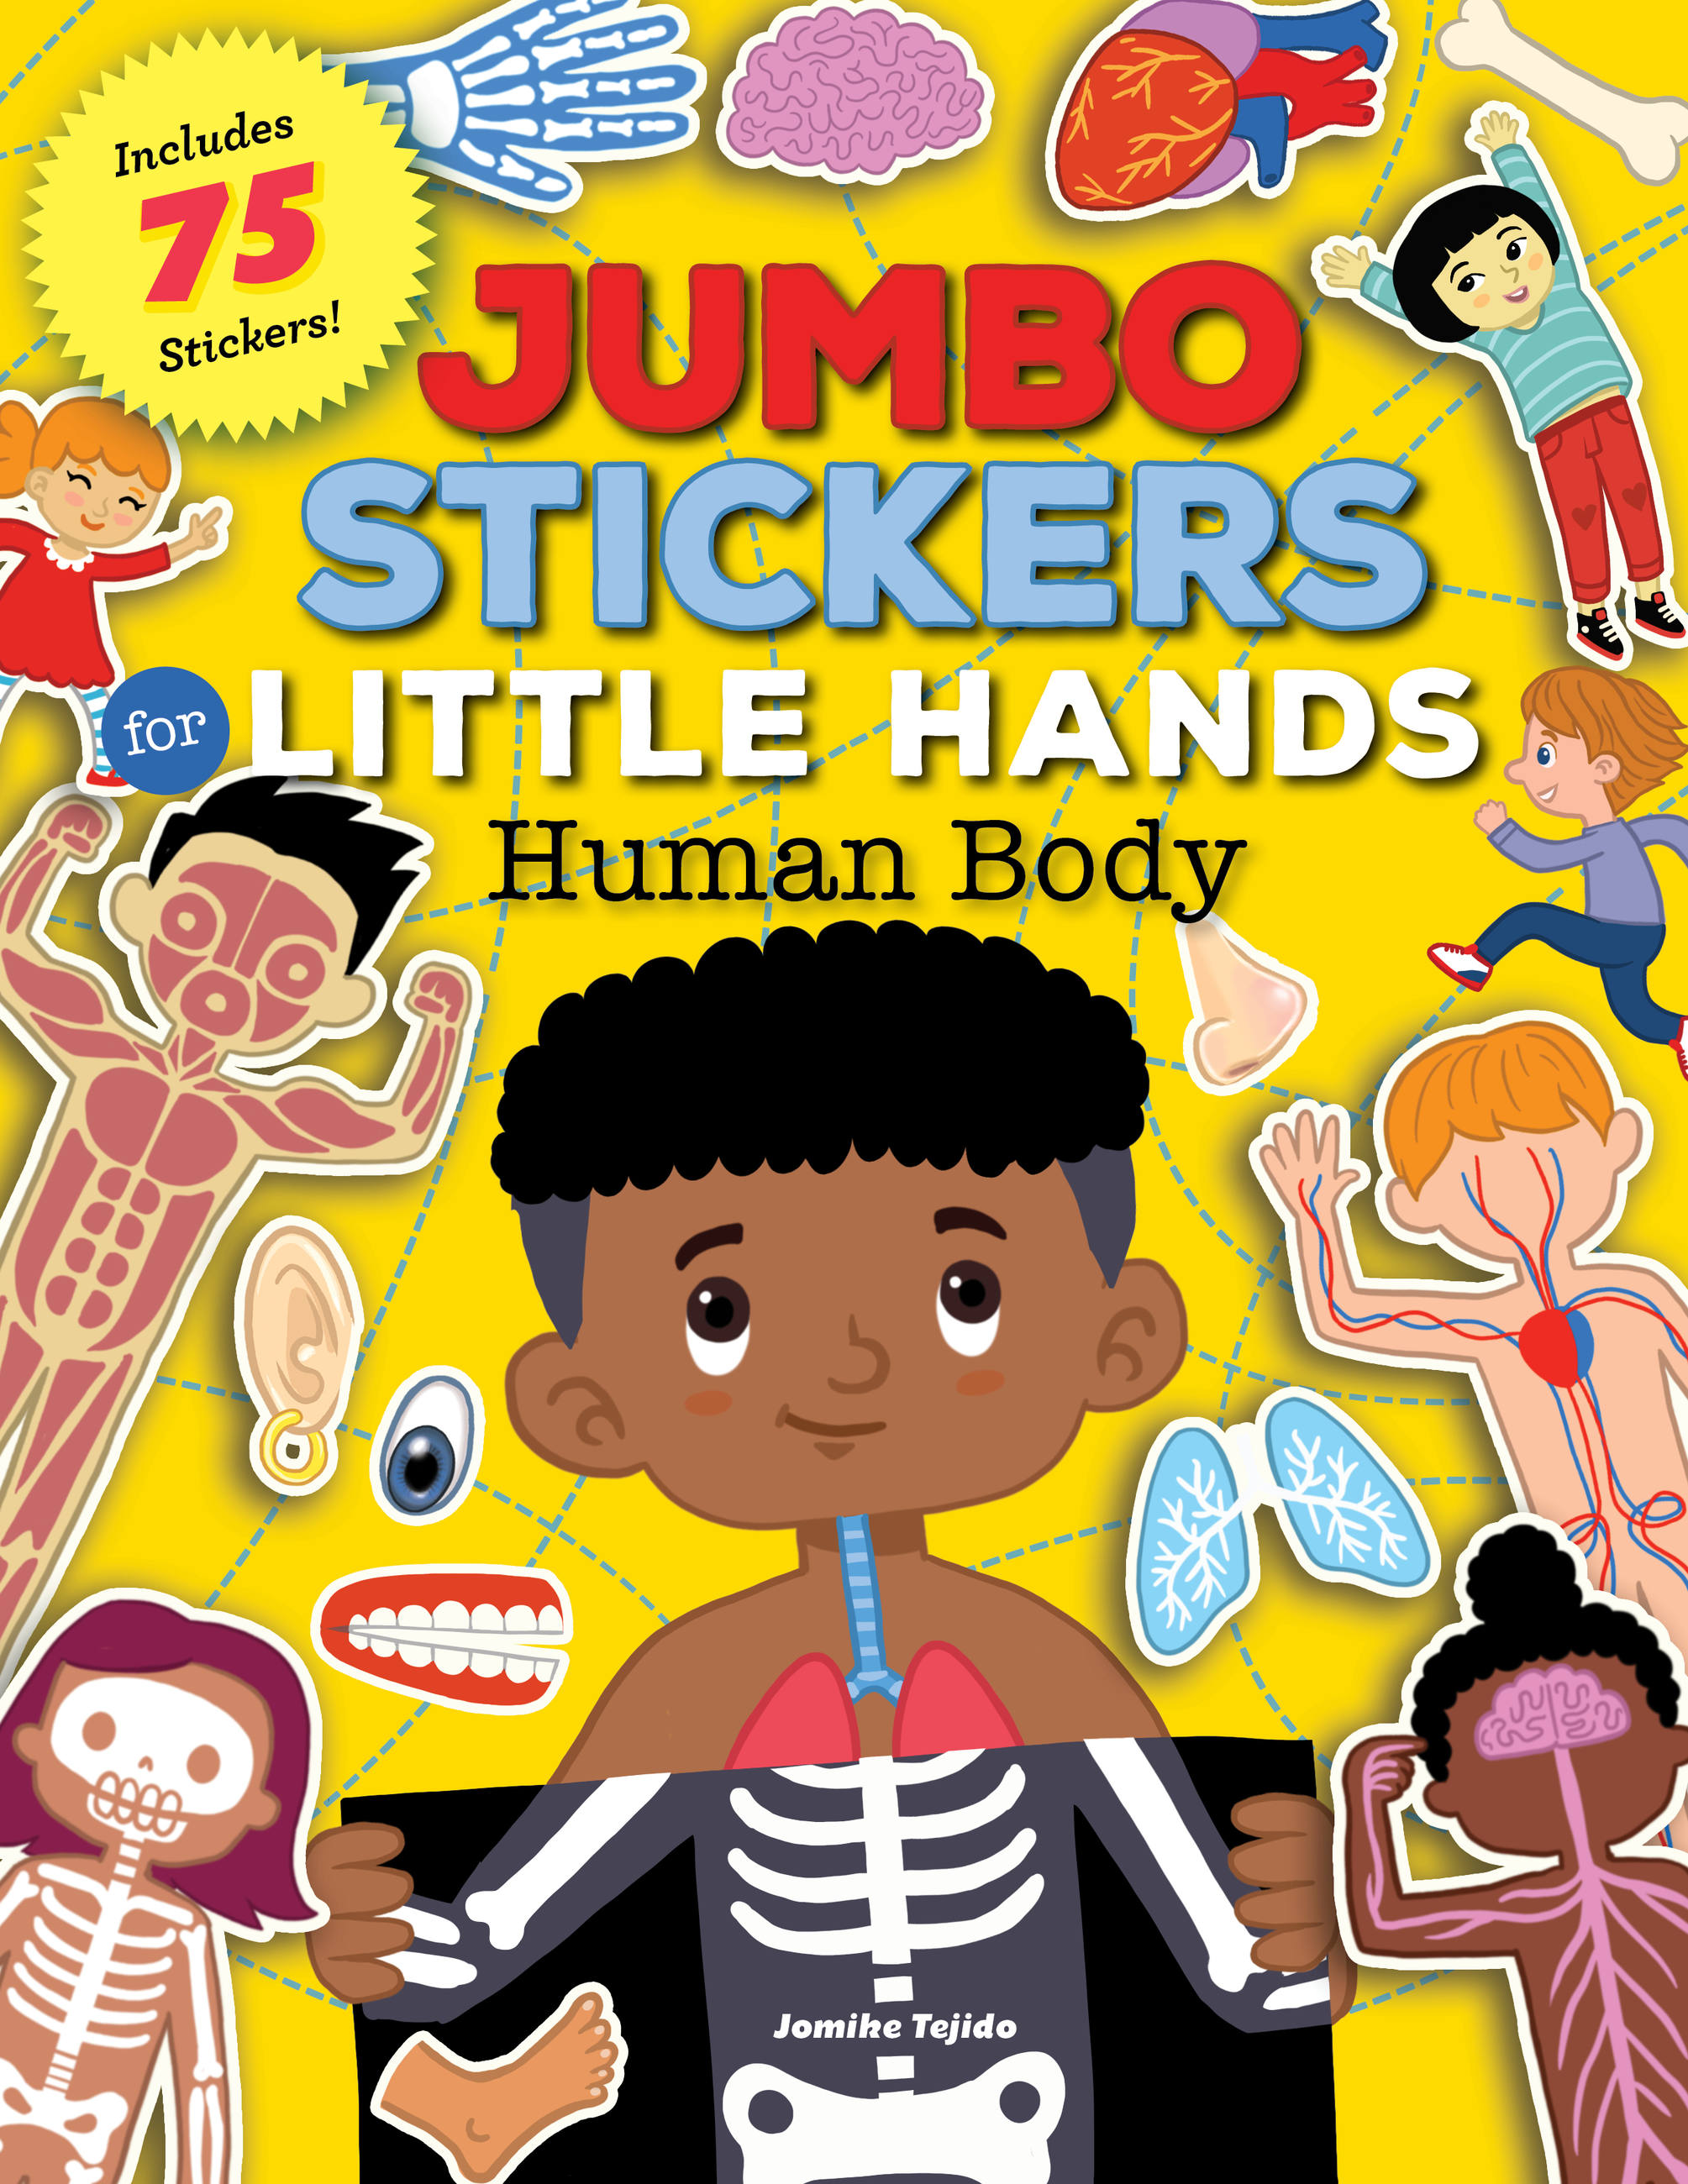 Human Body (Jumbo Stickers for Little Hands): Includes 75 Stickers